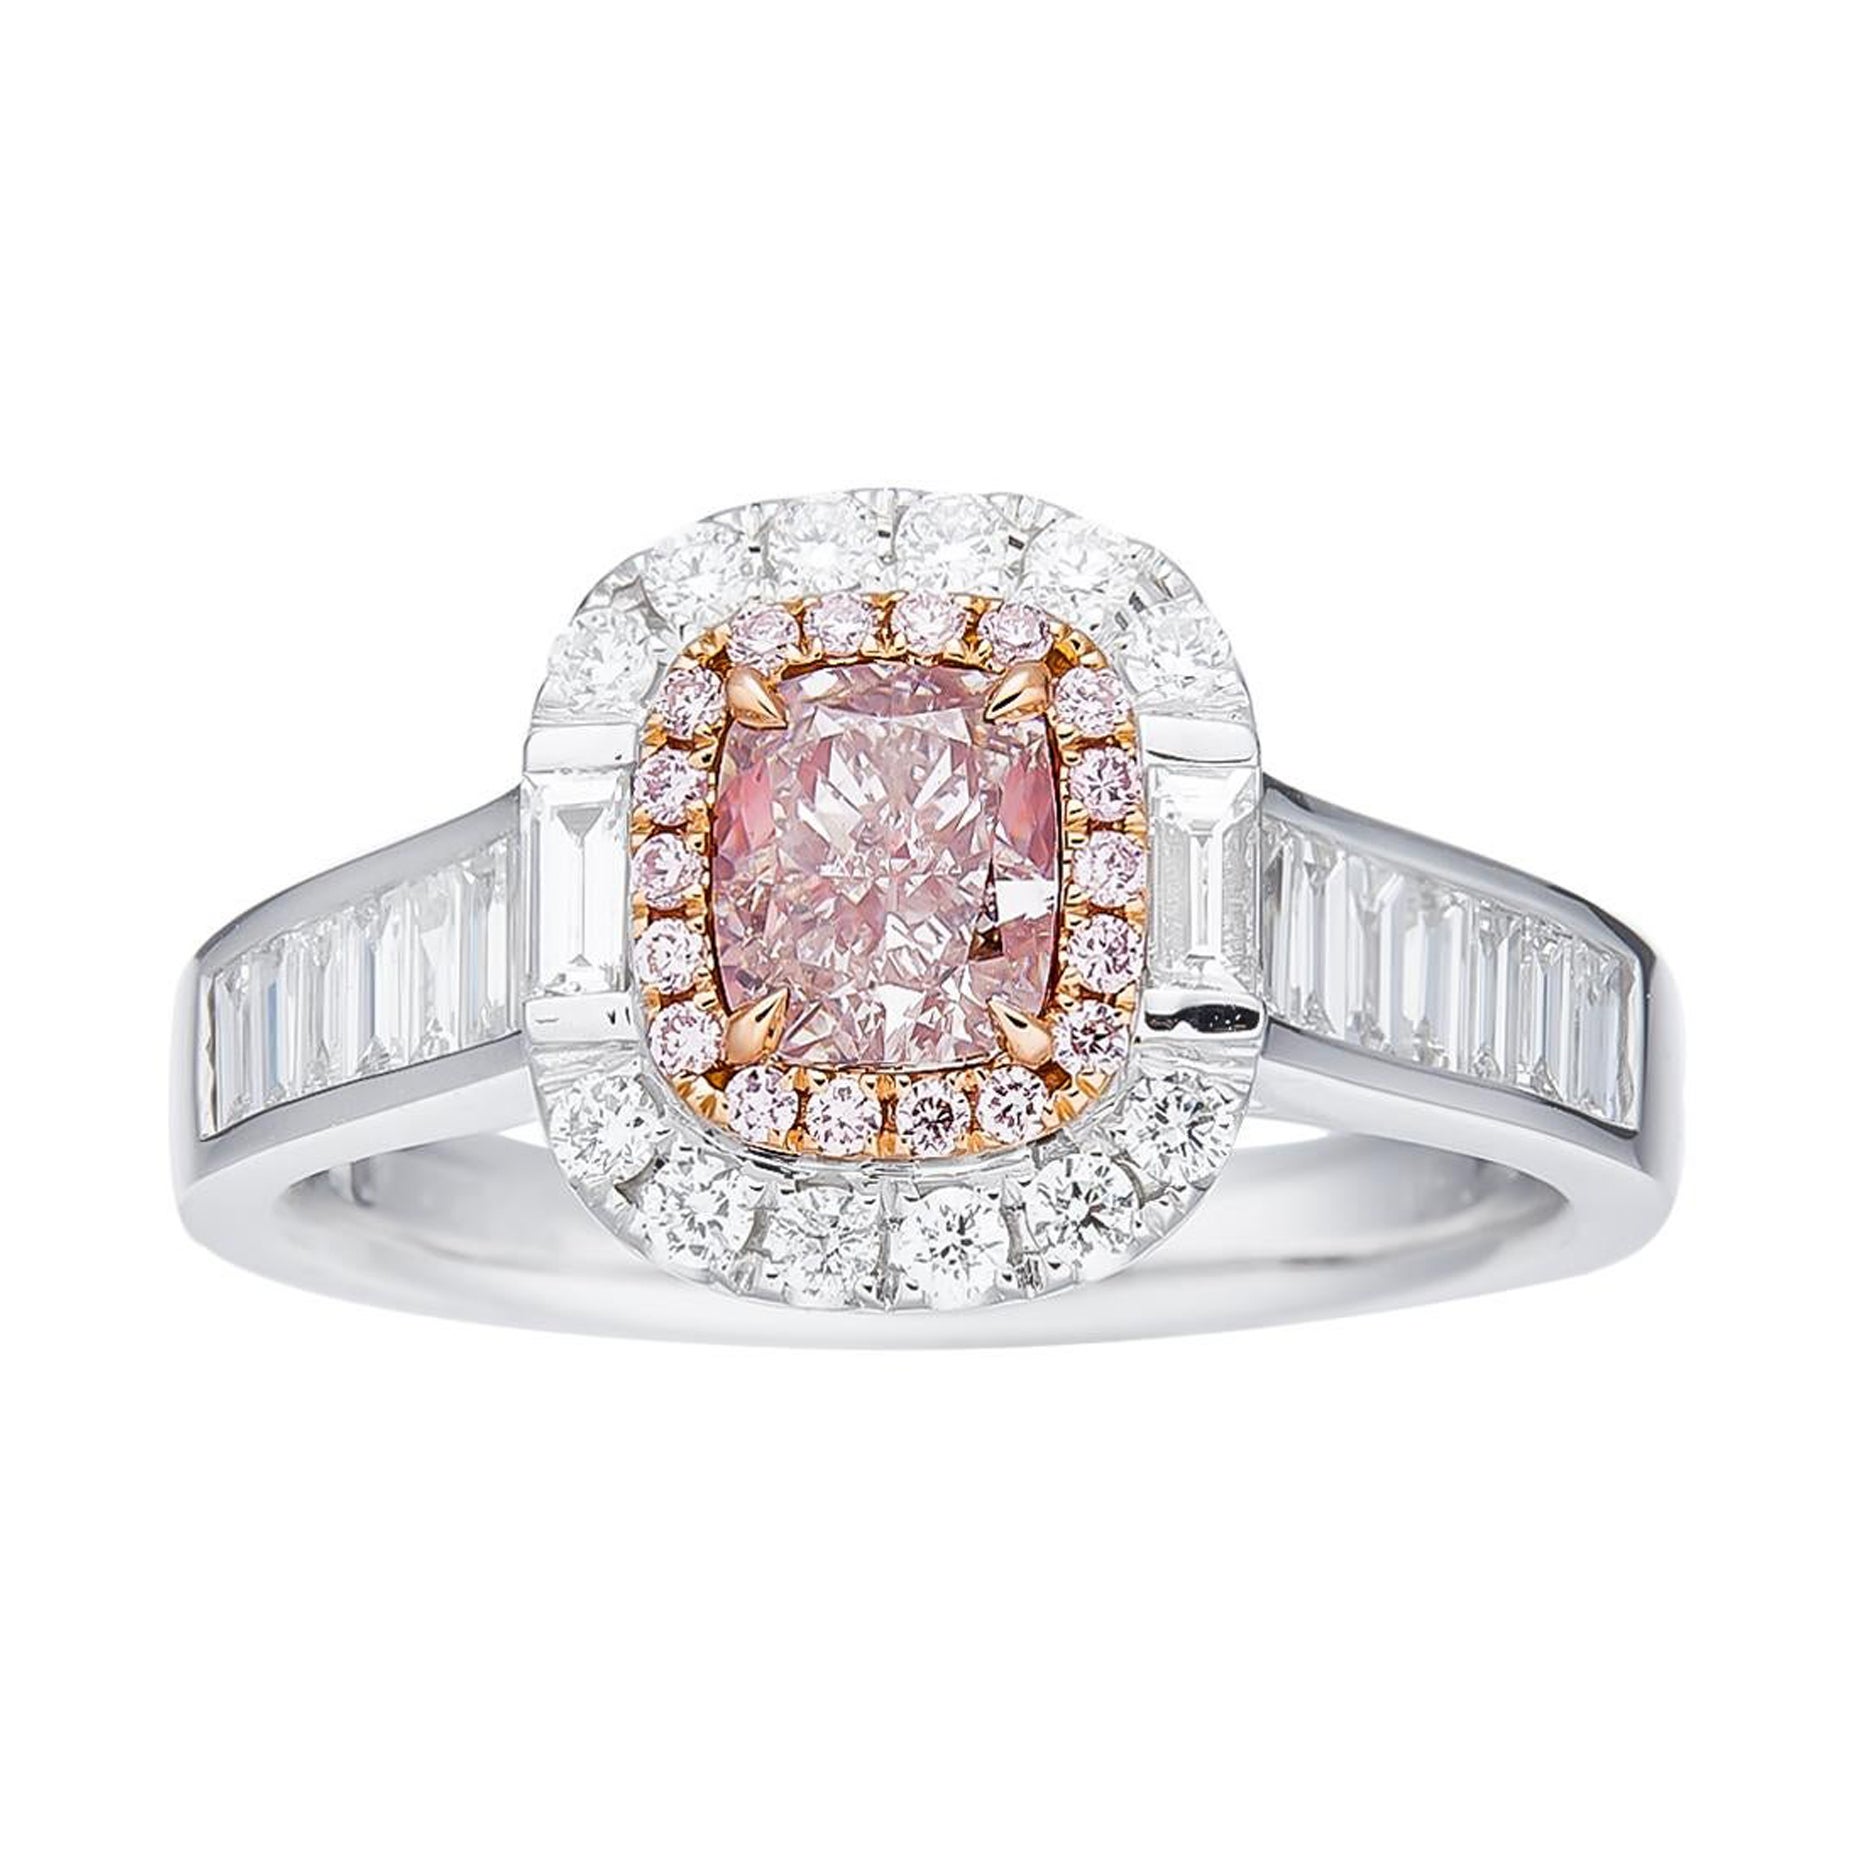 GIA Certified, 0.65ct Fancy Light Pink-Brown Natural Cushion Cut Diamond Ring. For Sale